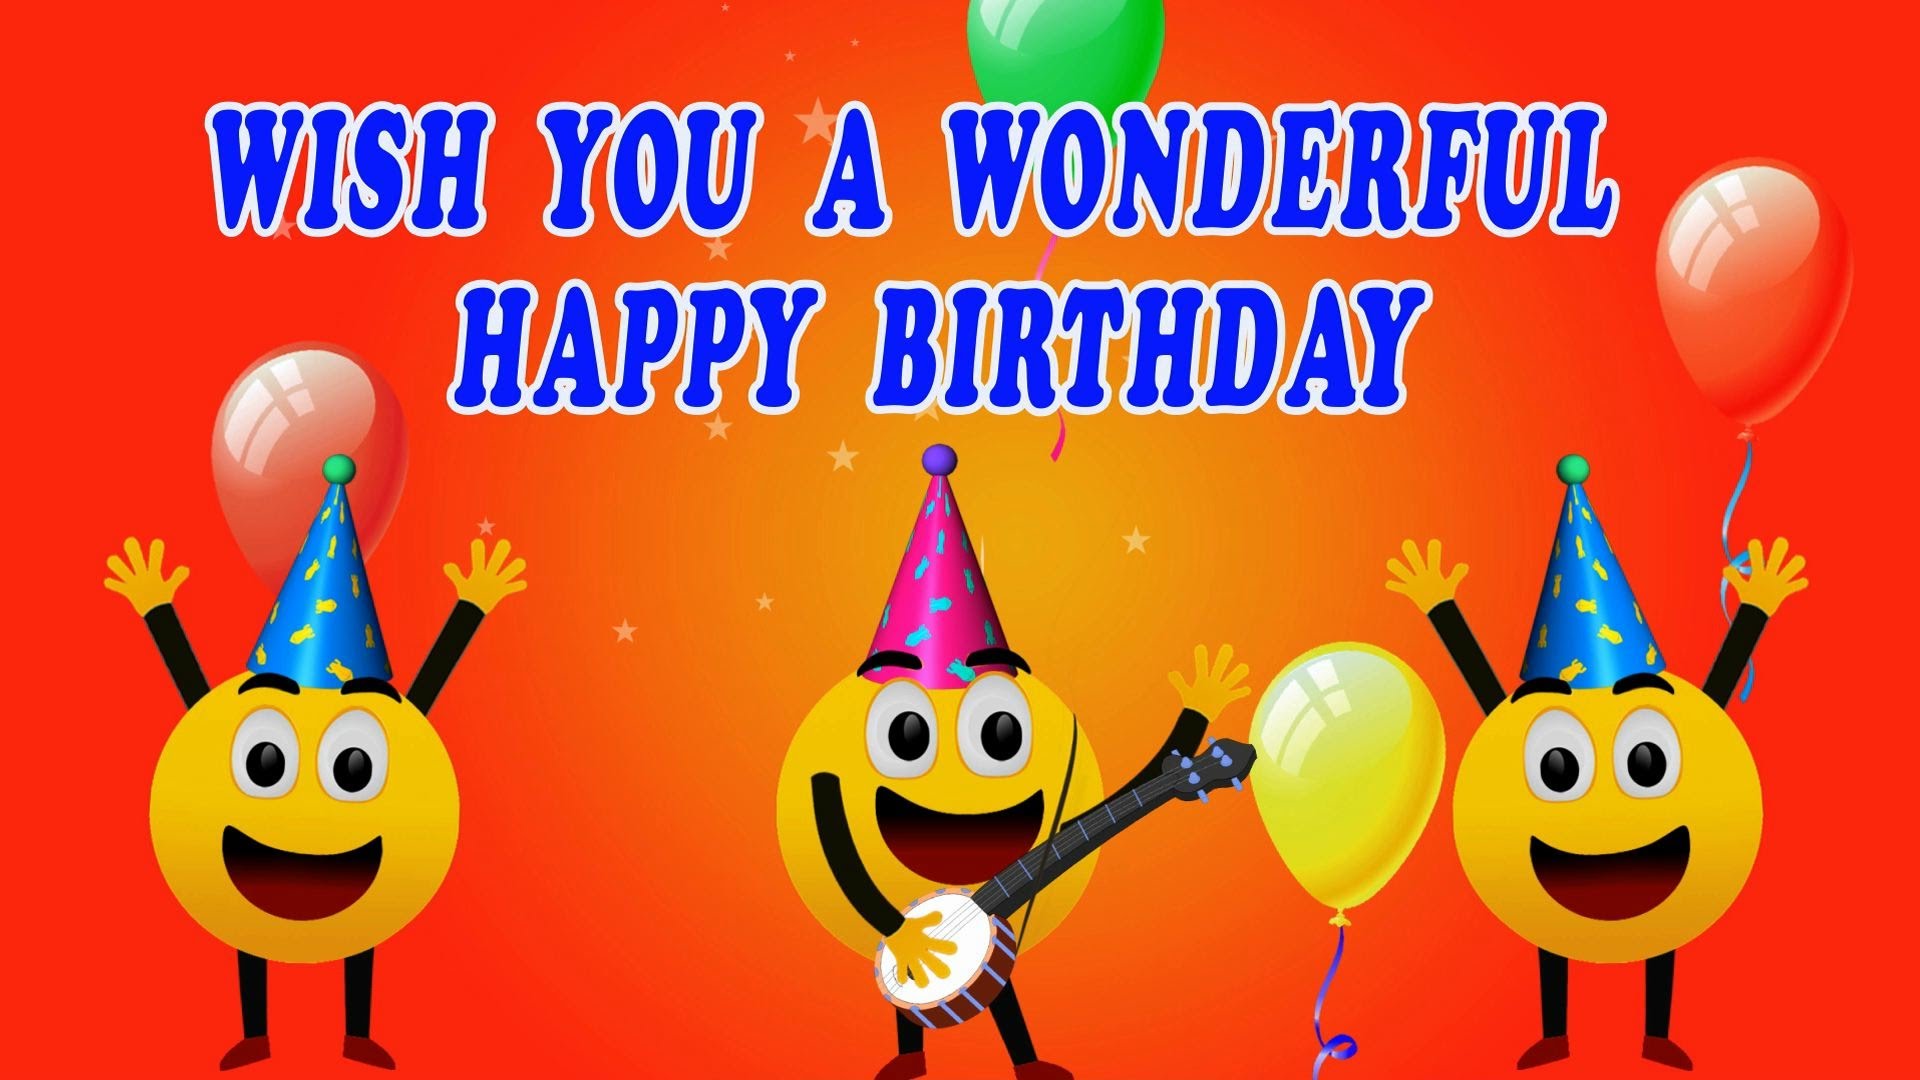 happy birthday card with smiley image 2017